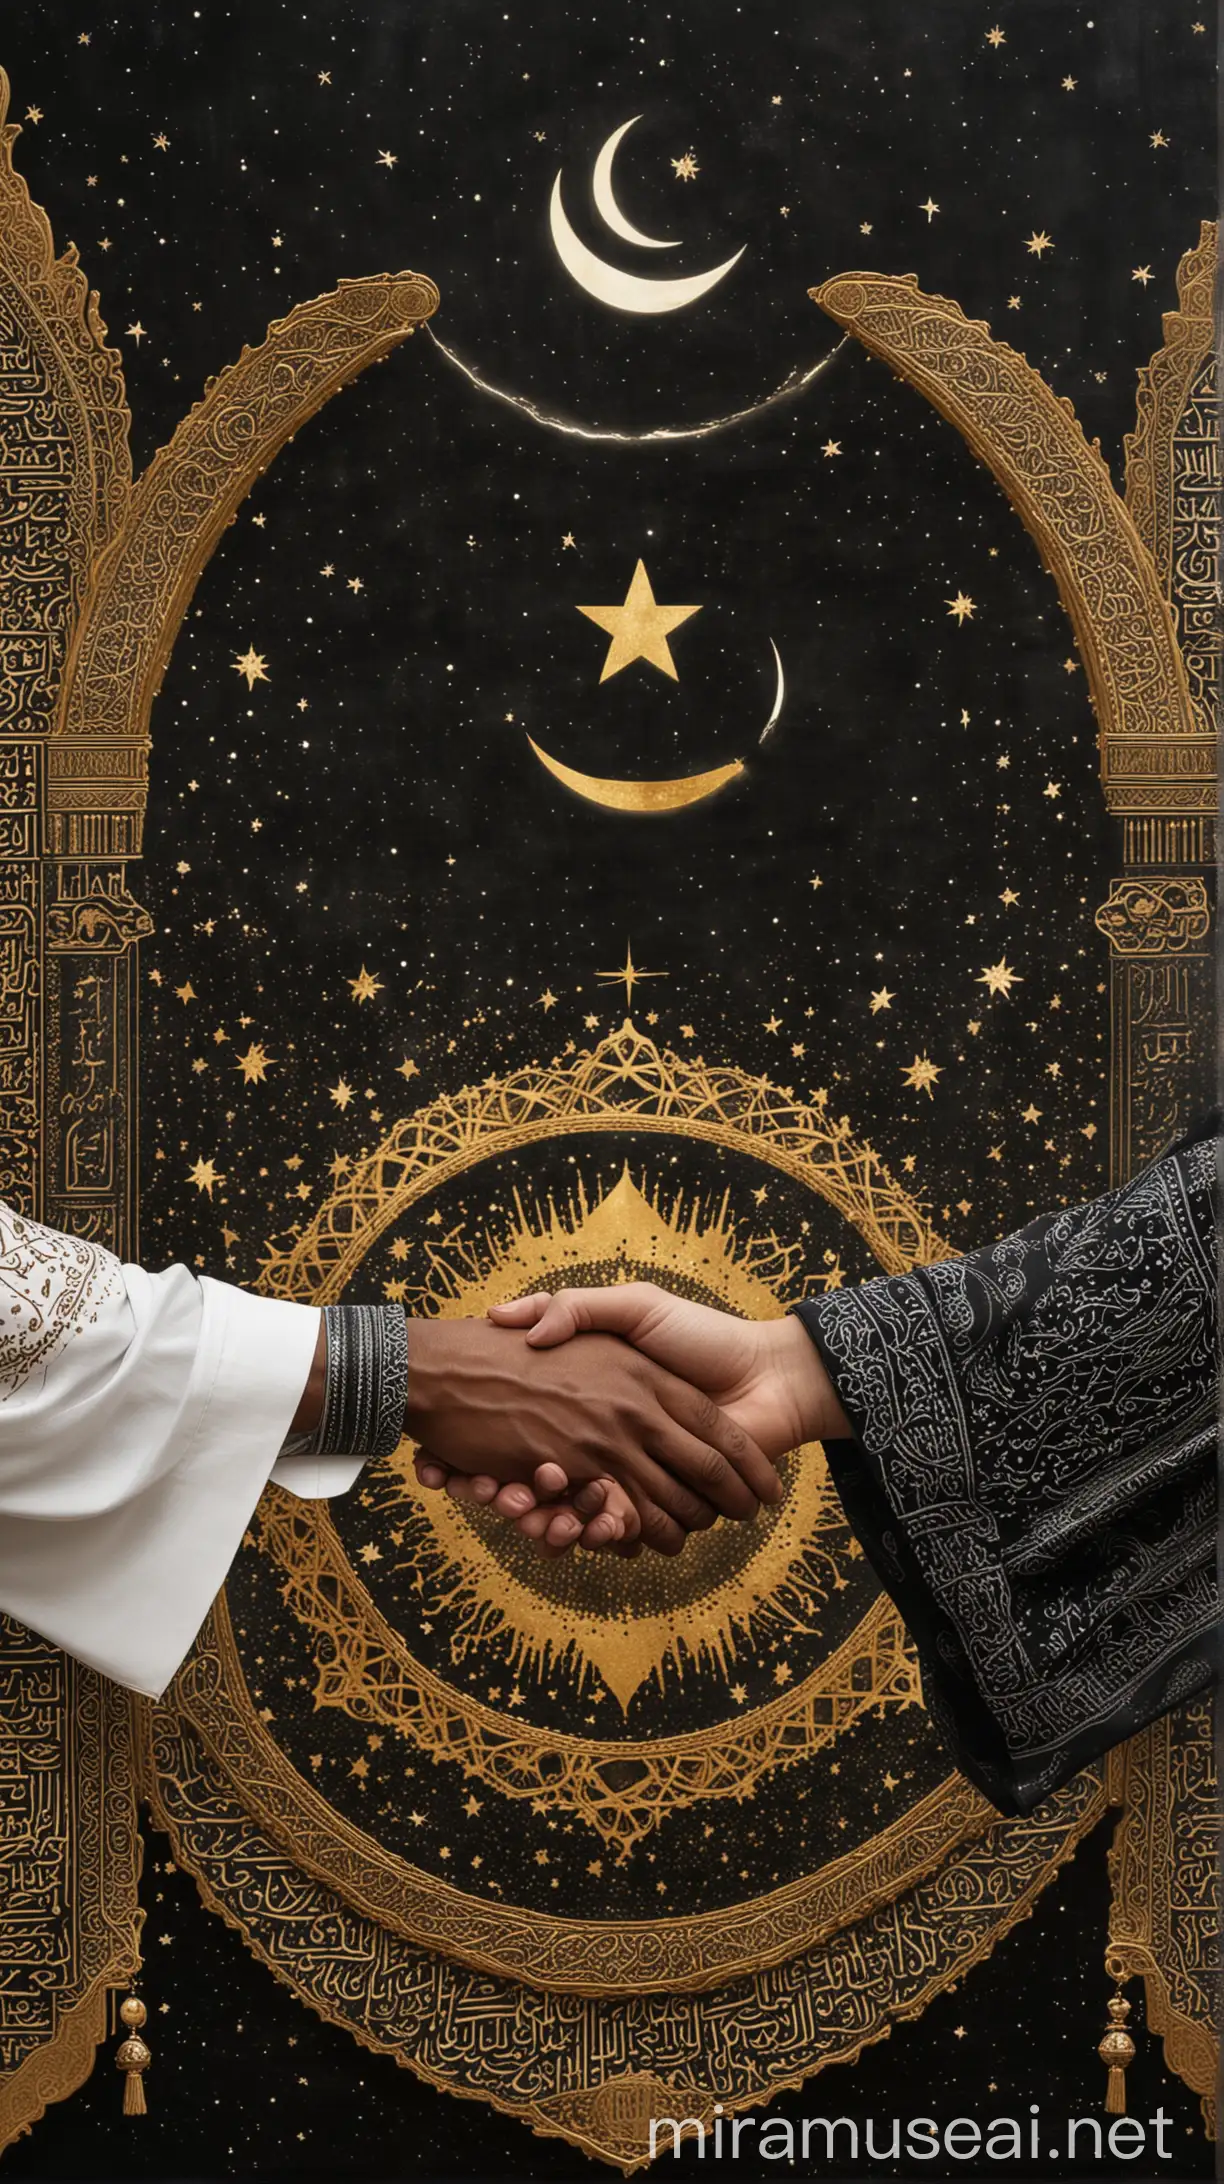 A symbolic image representing the Treaty of Hudaybiyyah, with the Kaaba in the background and two shaking hands in the foreground, one with a sleeve decorated in Islamic crescent moon and star, and the other with a patterned sleeve representing the Quraysh.